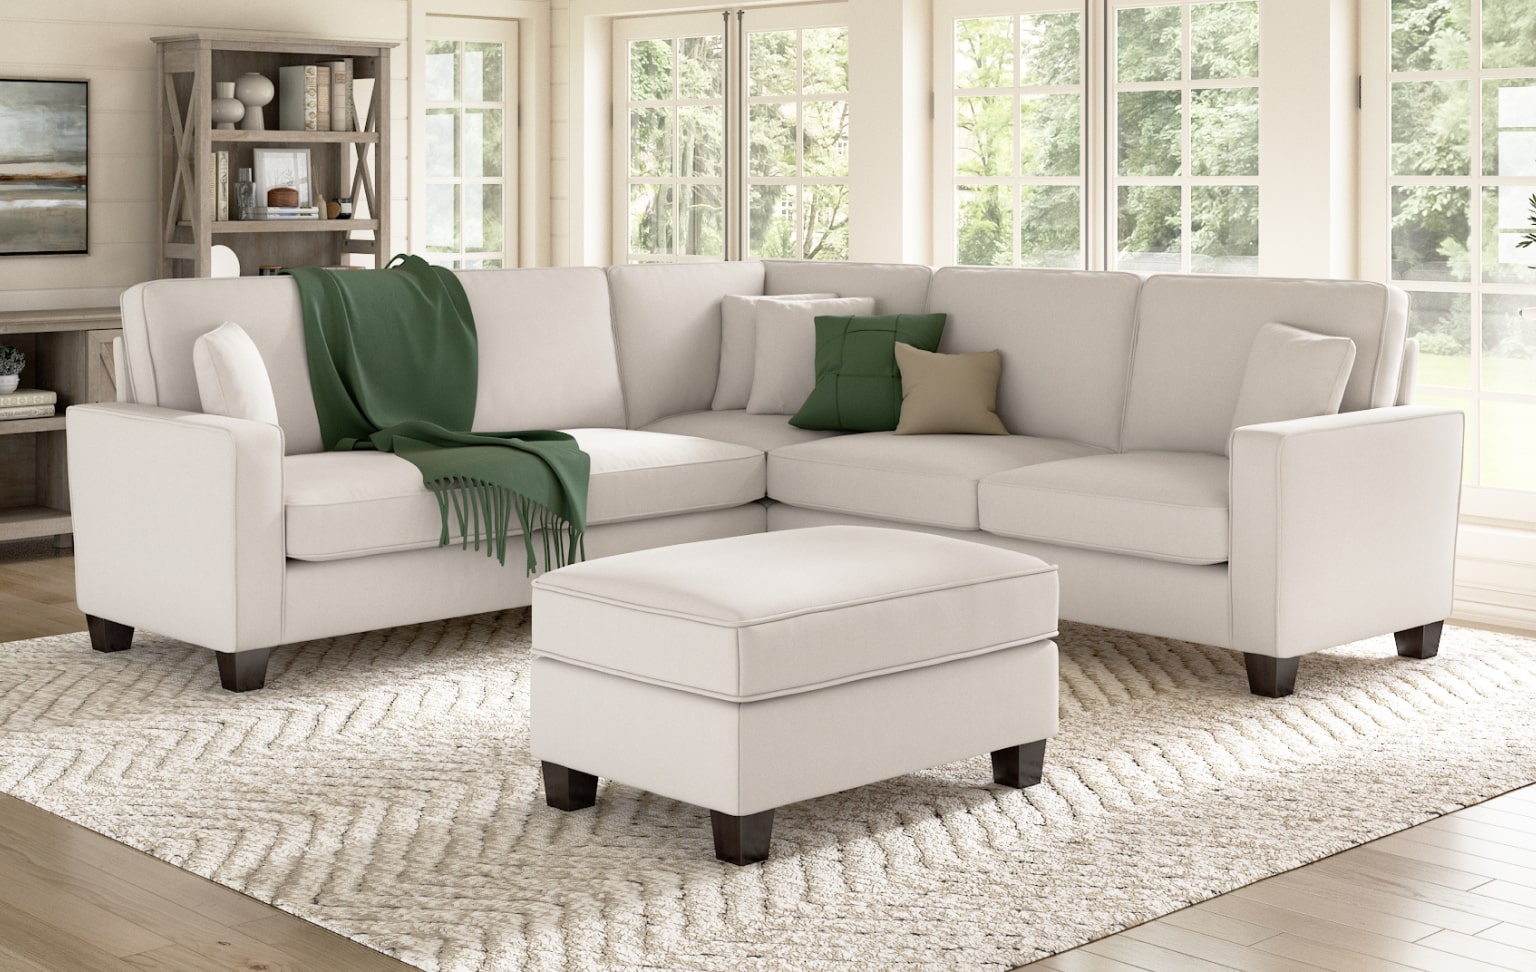 3 Reasons to Shop for an Upholstered Couch or Sofa from Bush Furniture